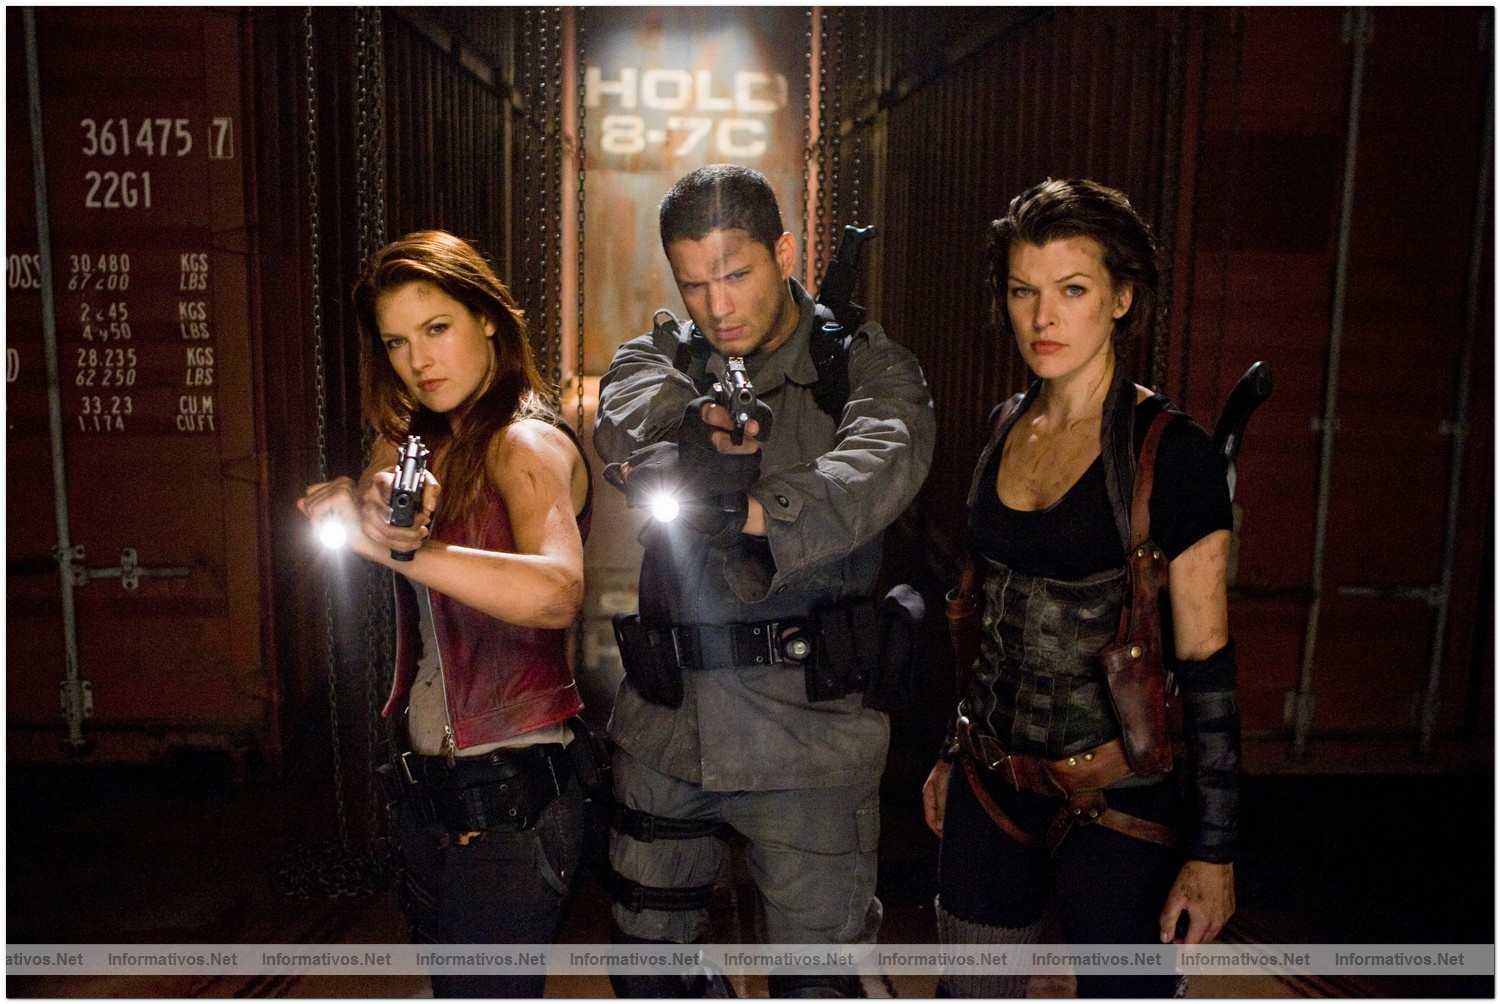 Ali Larter, Wentworth Miller and Milla Jovovich star in Screen Gems' action horror RESIDENT EVIL: AFTERLIFE.